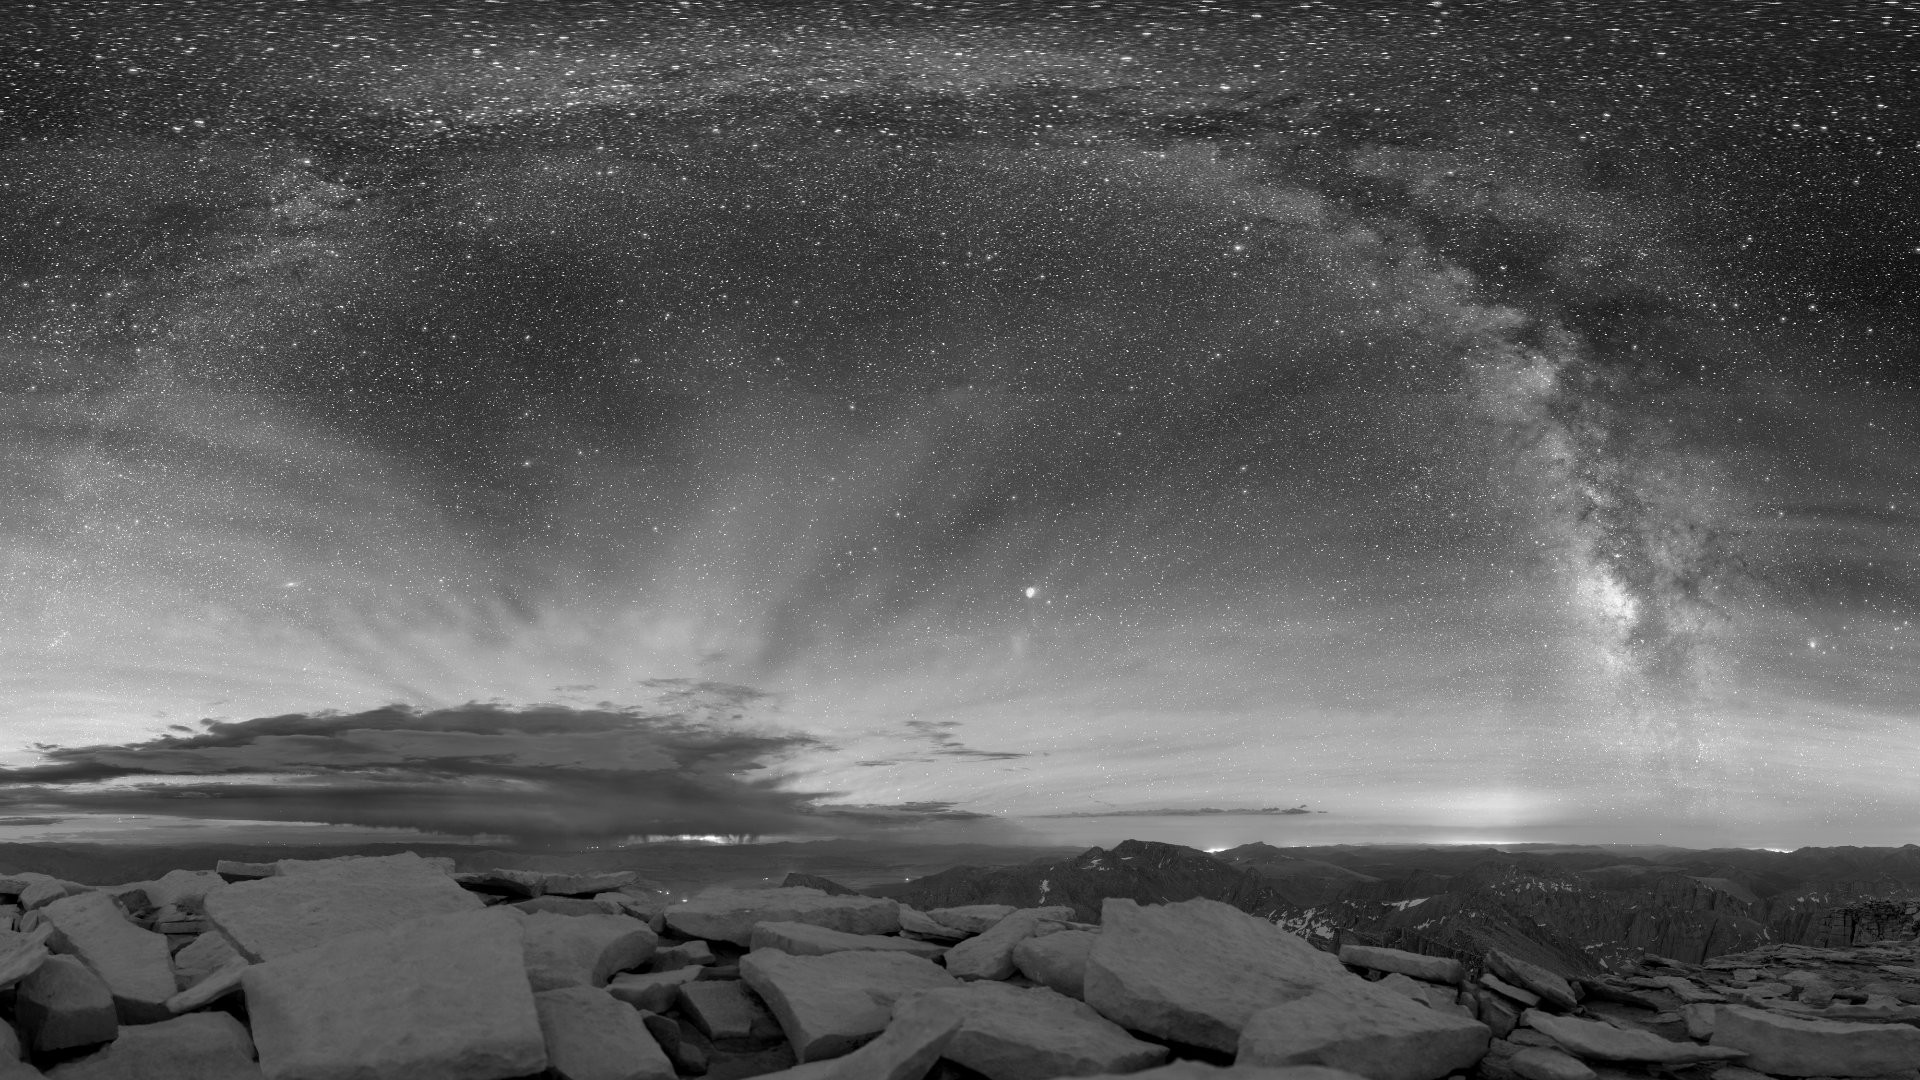 General 1920x1080 Milky Way space monochrome sky stars nature outdoors